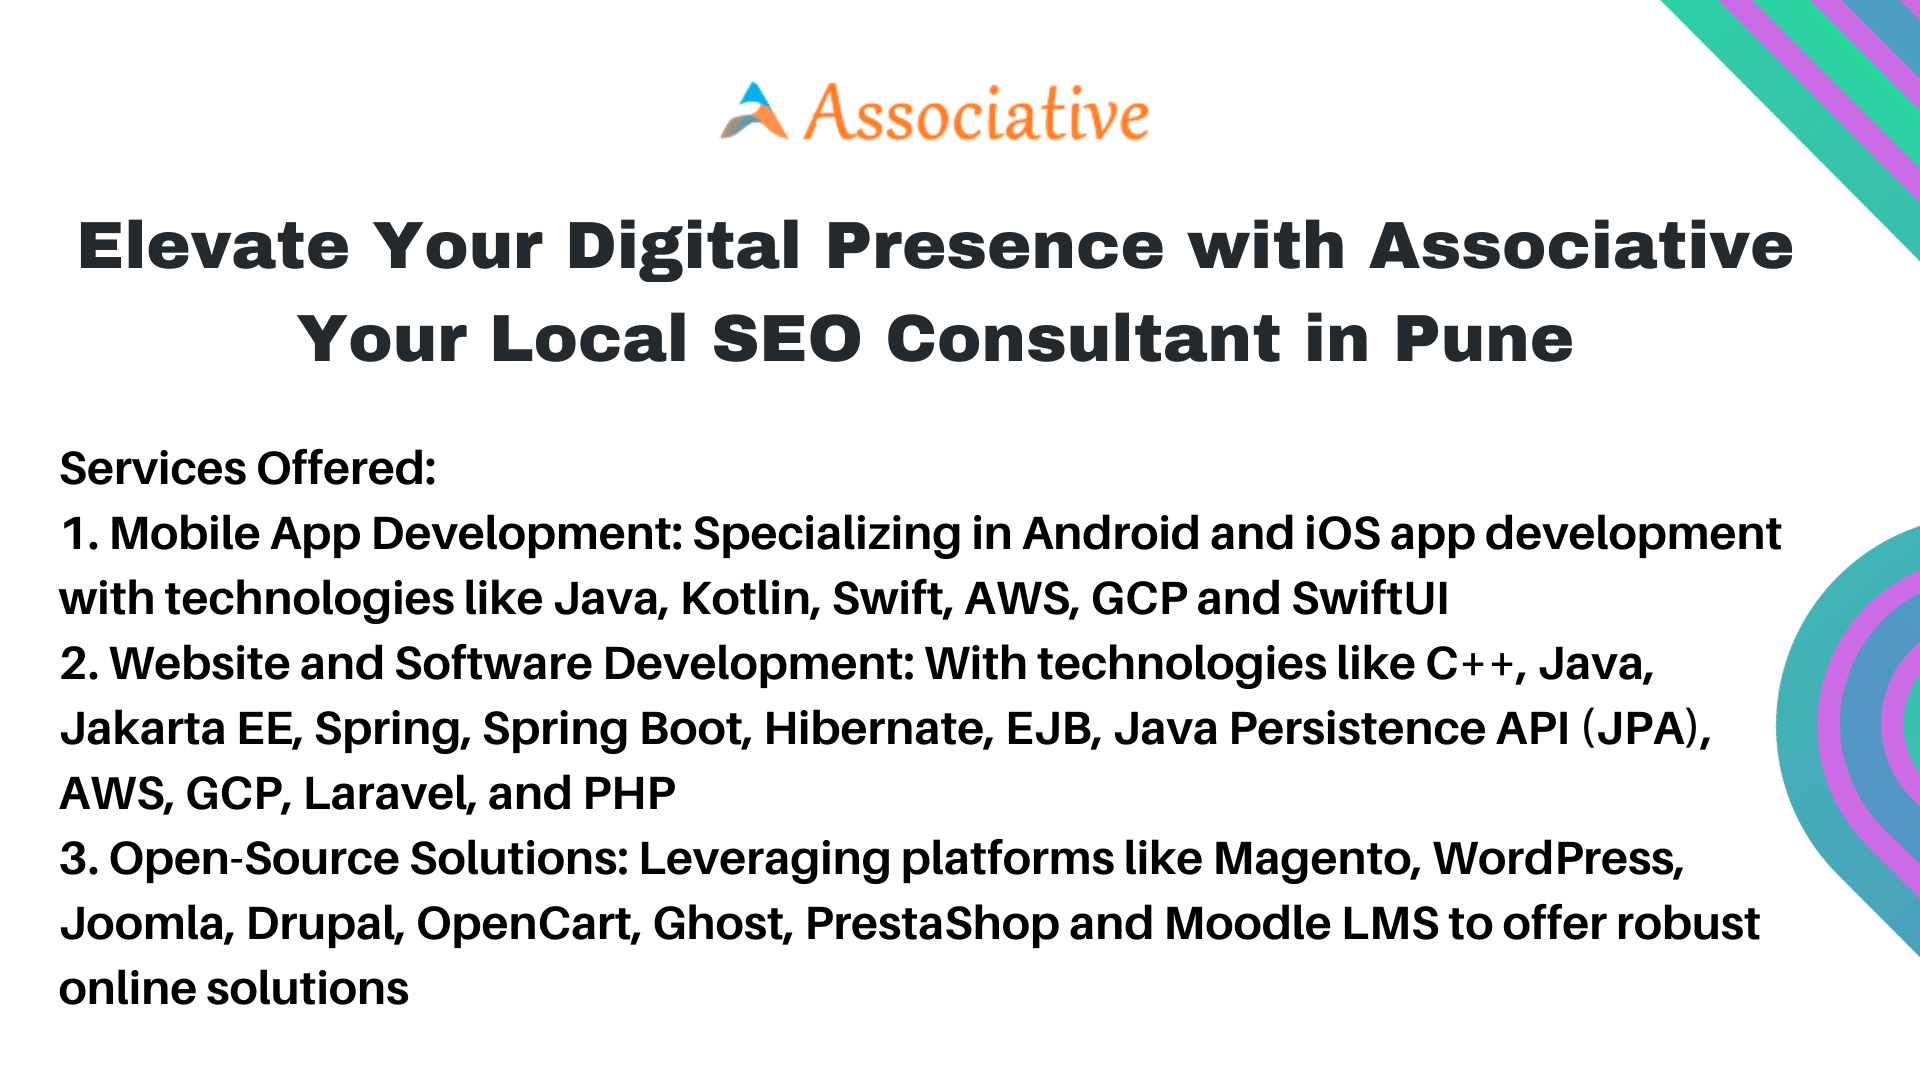 Elevate Your Digital Presence with Associative Your Local SEO Consultant in Pune